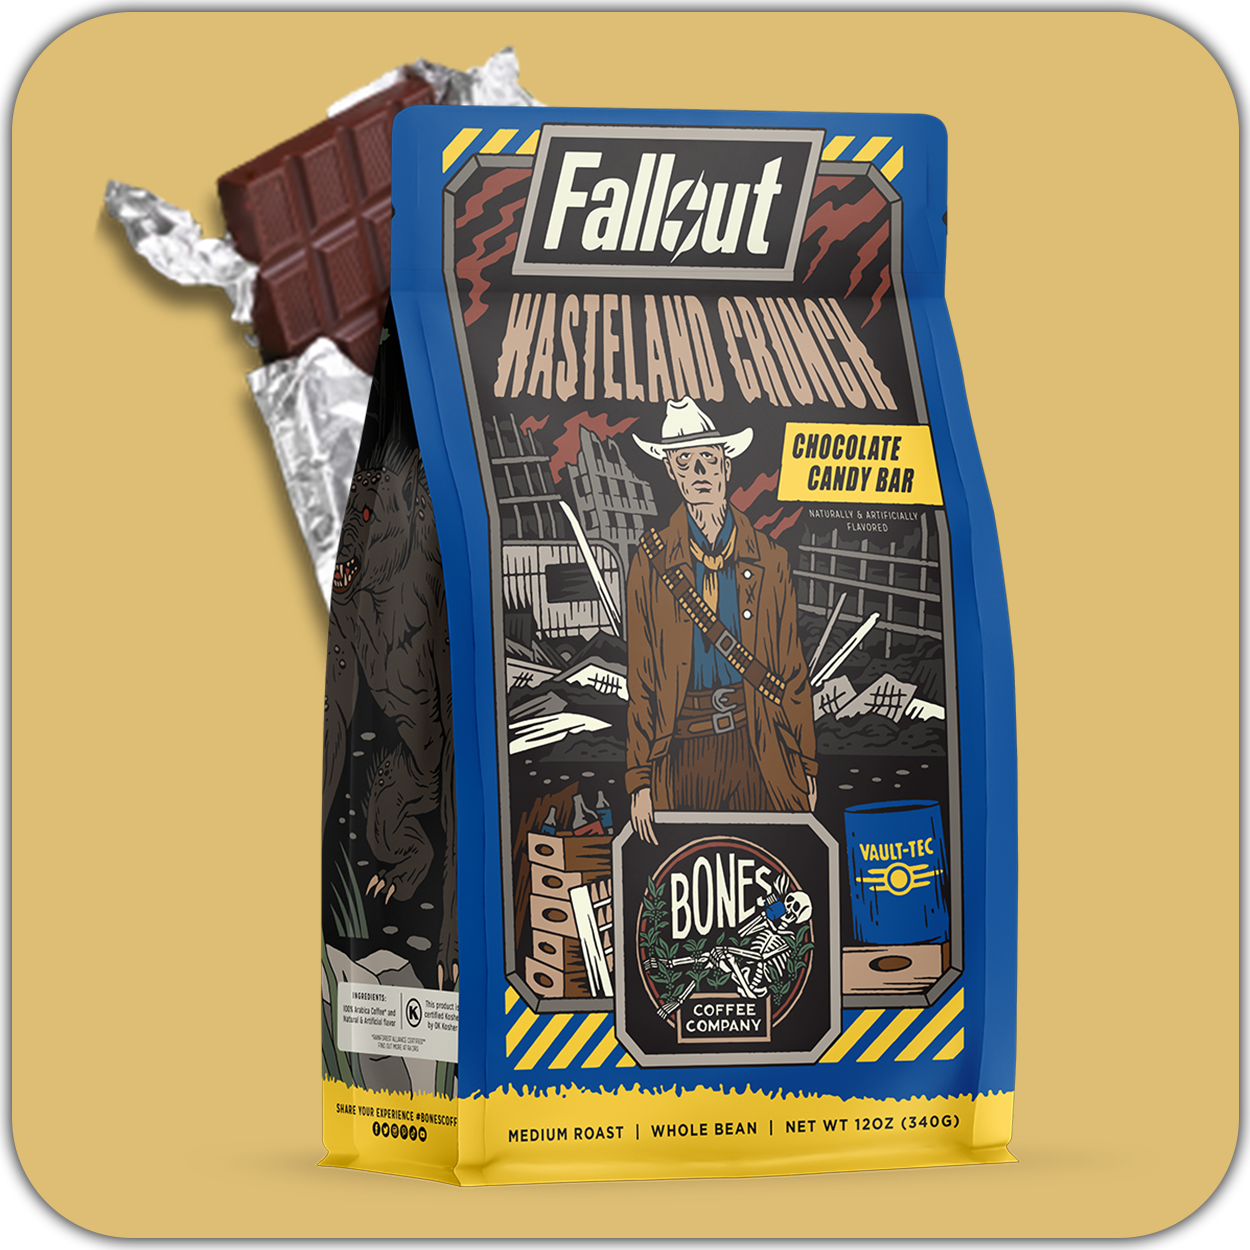 A 12 ounce bag of flavored coffee inspired by Fallout named Wasteland Crunch. Its flavor is chocolate candy bar. On the art is The Ghoul from the Fallout show, and there is a chocolate candy bar nearby it. A light brown rounded square is behind it.